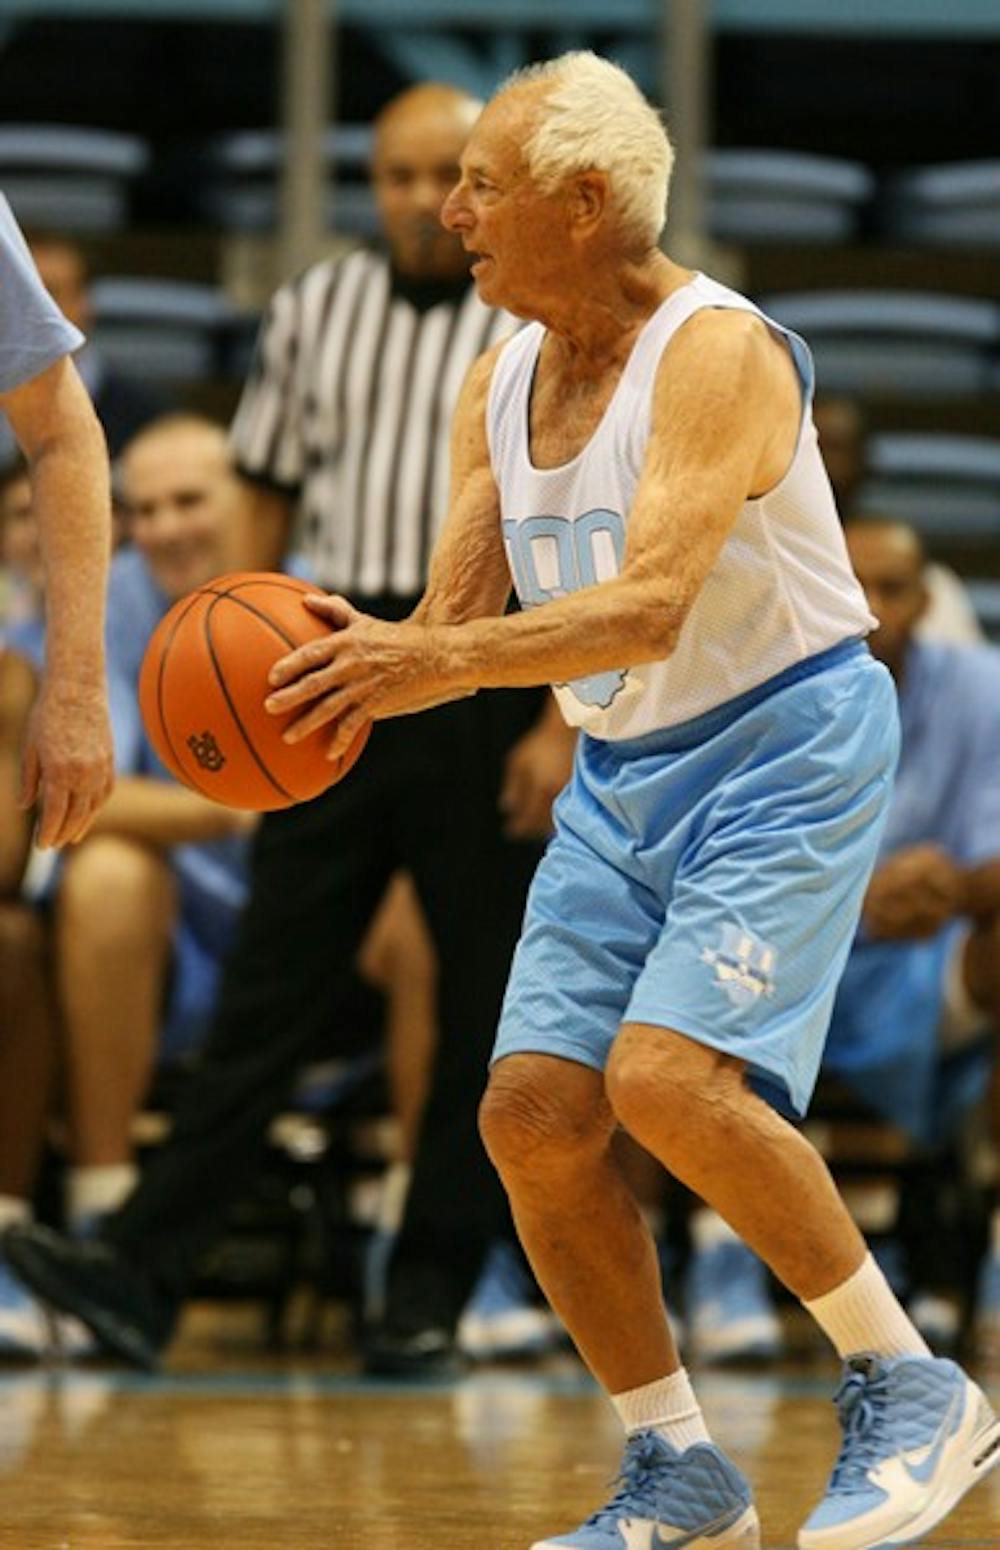 Bobby Gersten handles the ball near the beginning of Friday night’s exhibition game. DTH/ill cooper